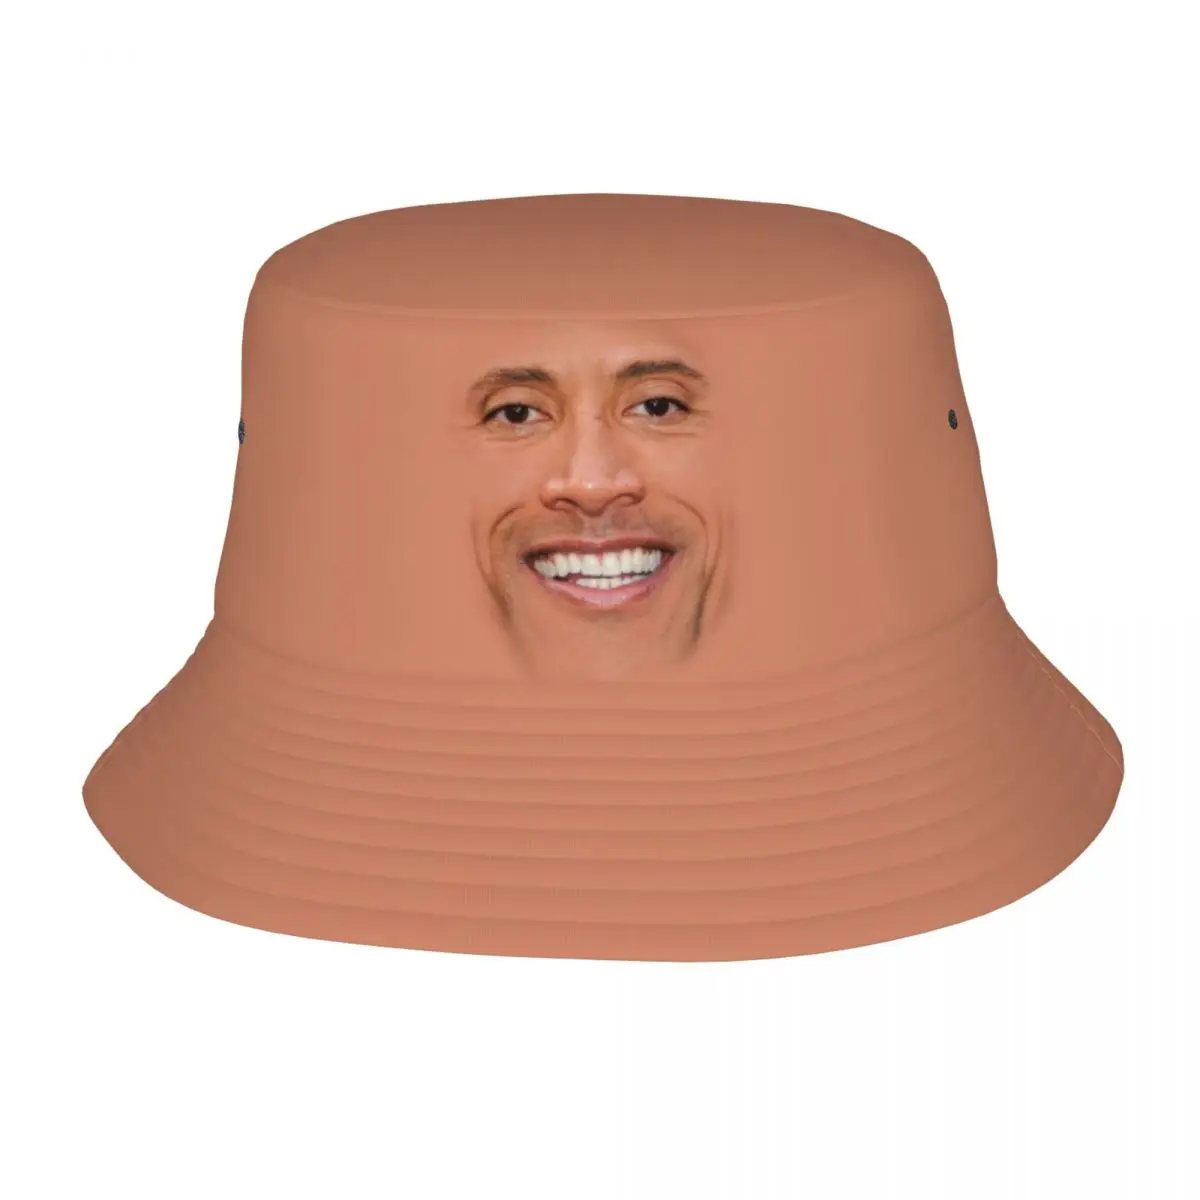 

Dwayne Bob Hats for Woman Summer Dwayne American Actor Johnson Sun Hats Street Packable for Hiking Fisherman Cap Session Hats